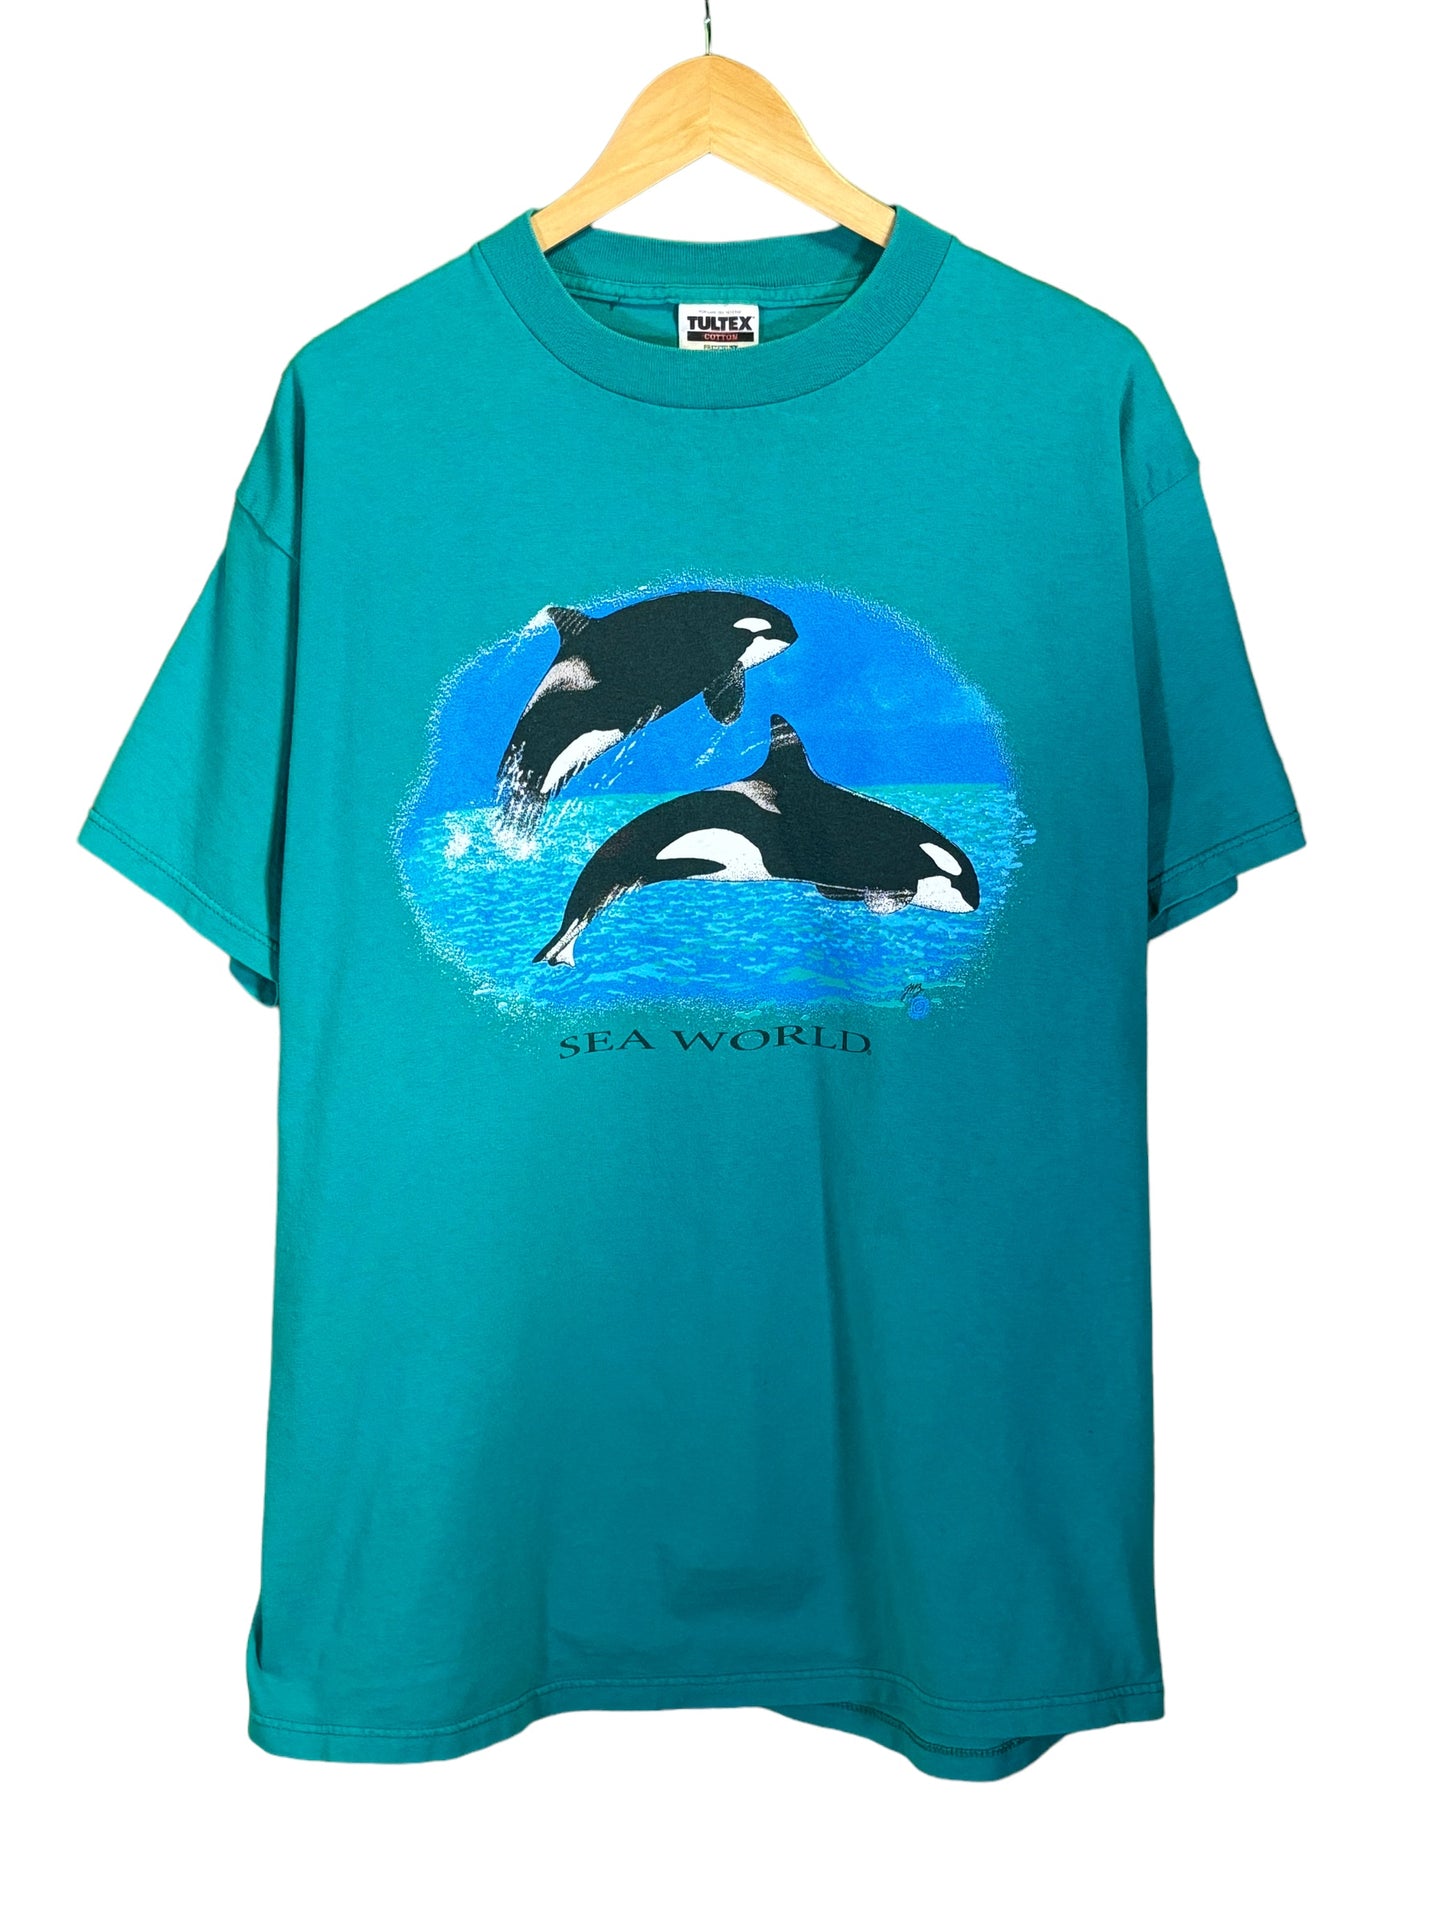 Vintage 90's Tultex Seaworld Orca Whale Nature Graphic Tee Size XL